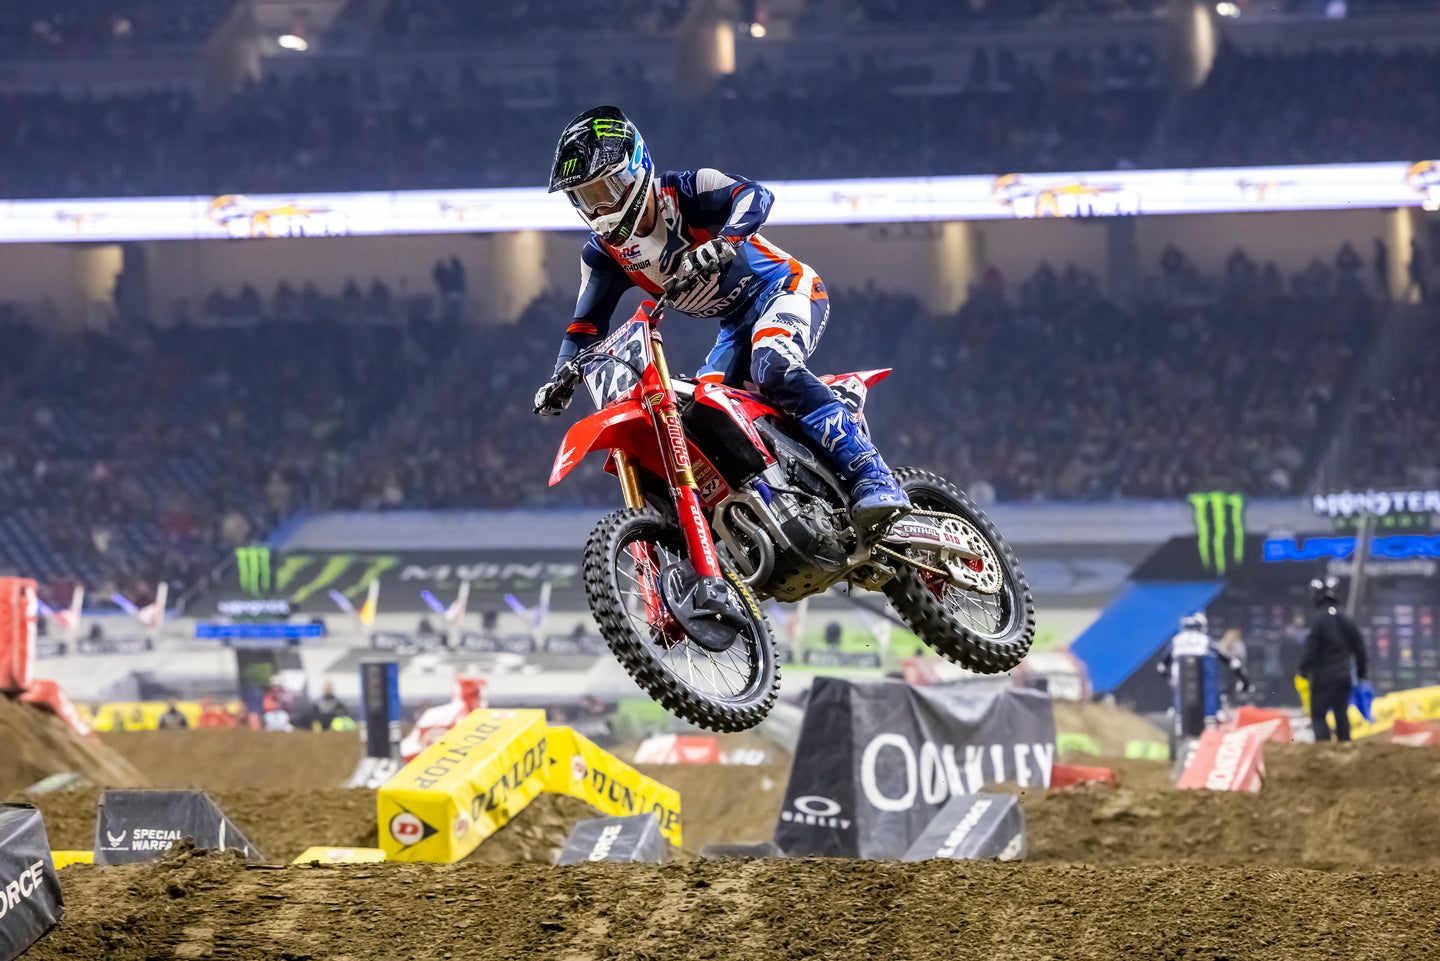 ALPINESTARS TOP FOUR LOCK-OUT AS CHASE SEXTON TASTES 450SX VICTORY IN DETROIT